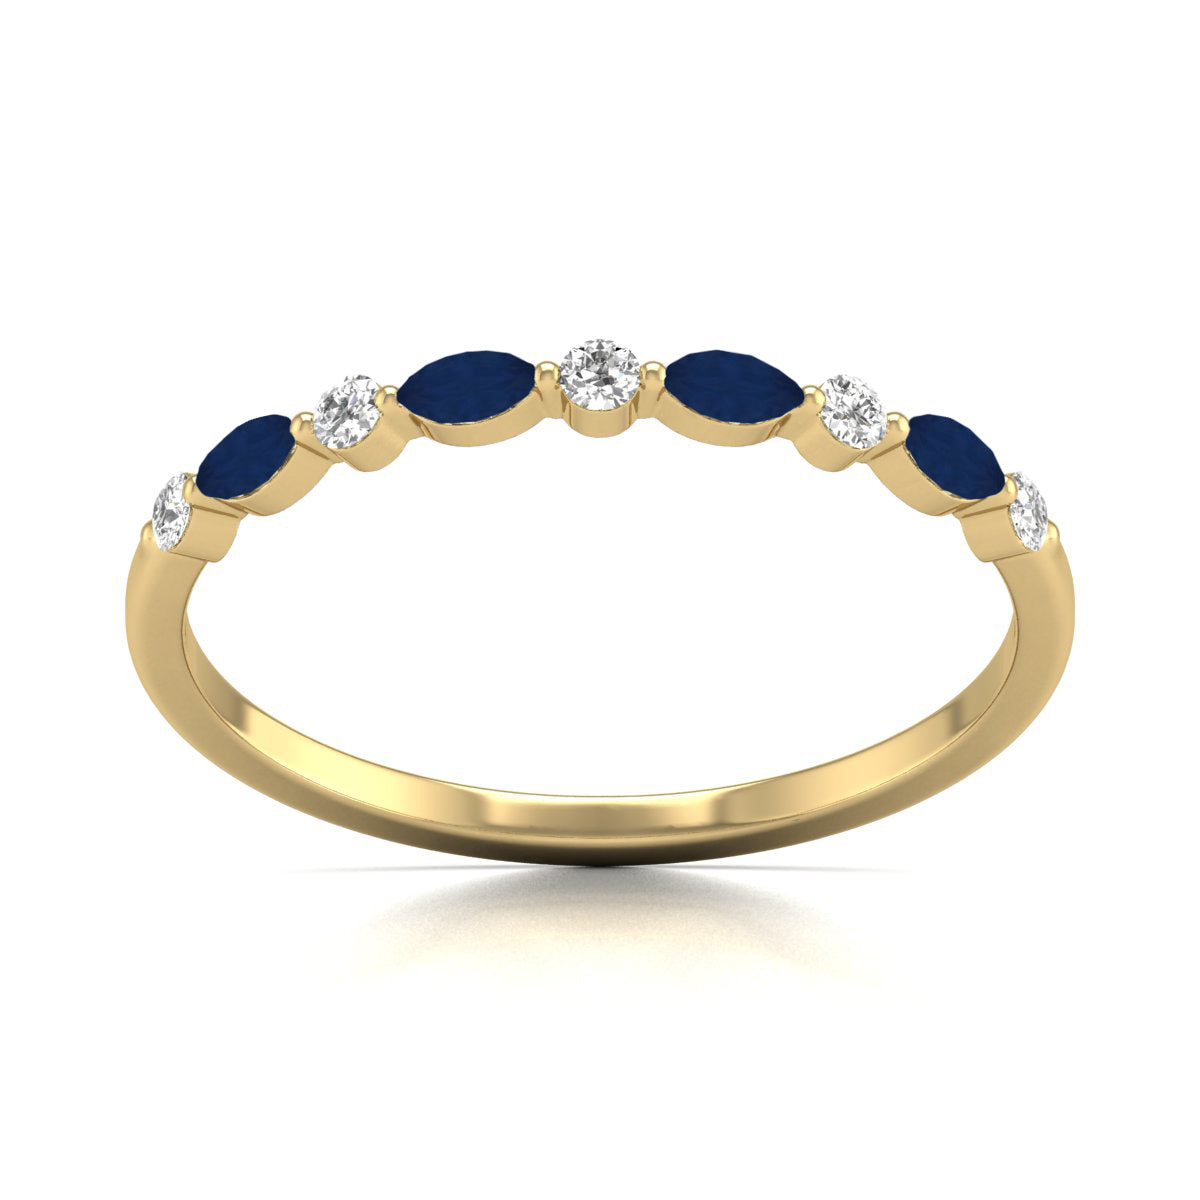 Natural Round Diamond and Marquise shape Gemstone Ring in 14K White and Yellow Gold